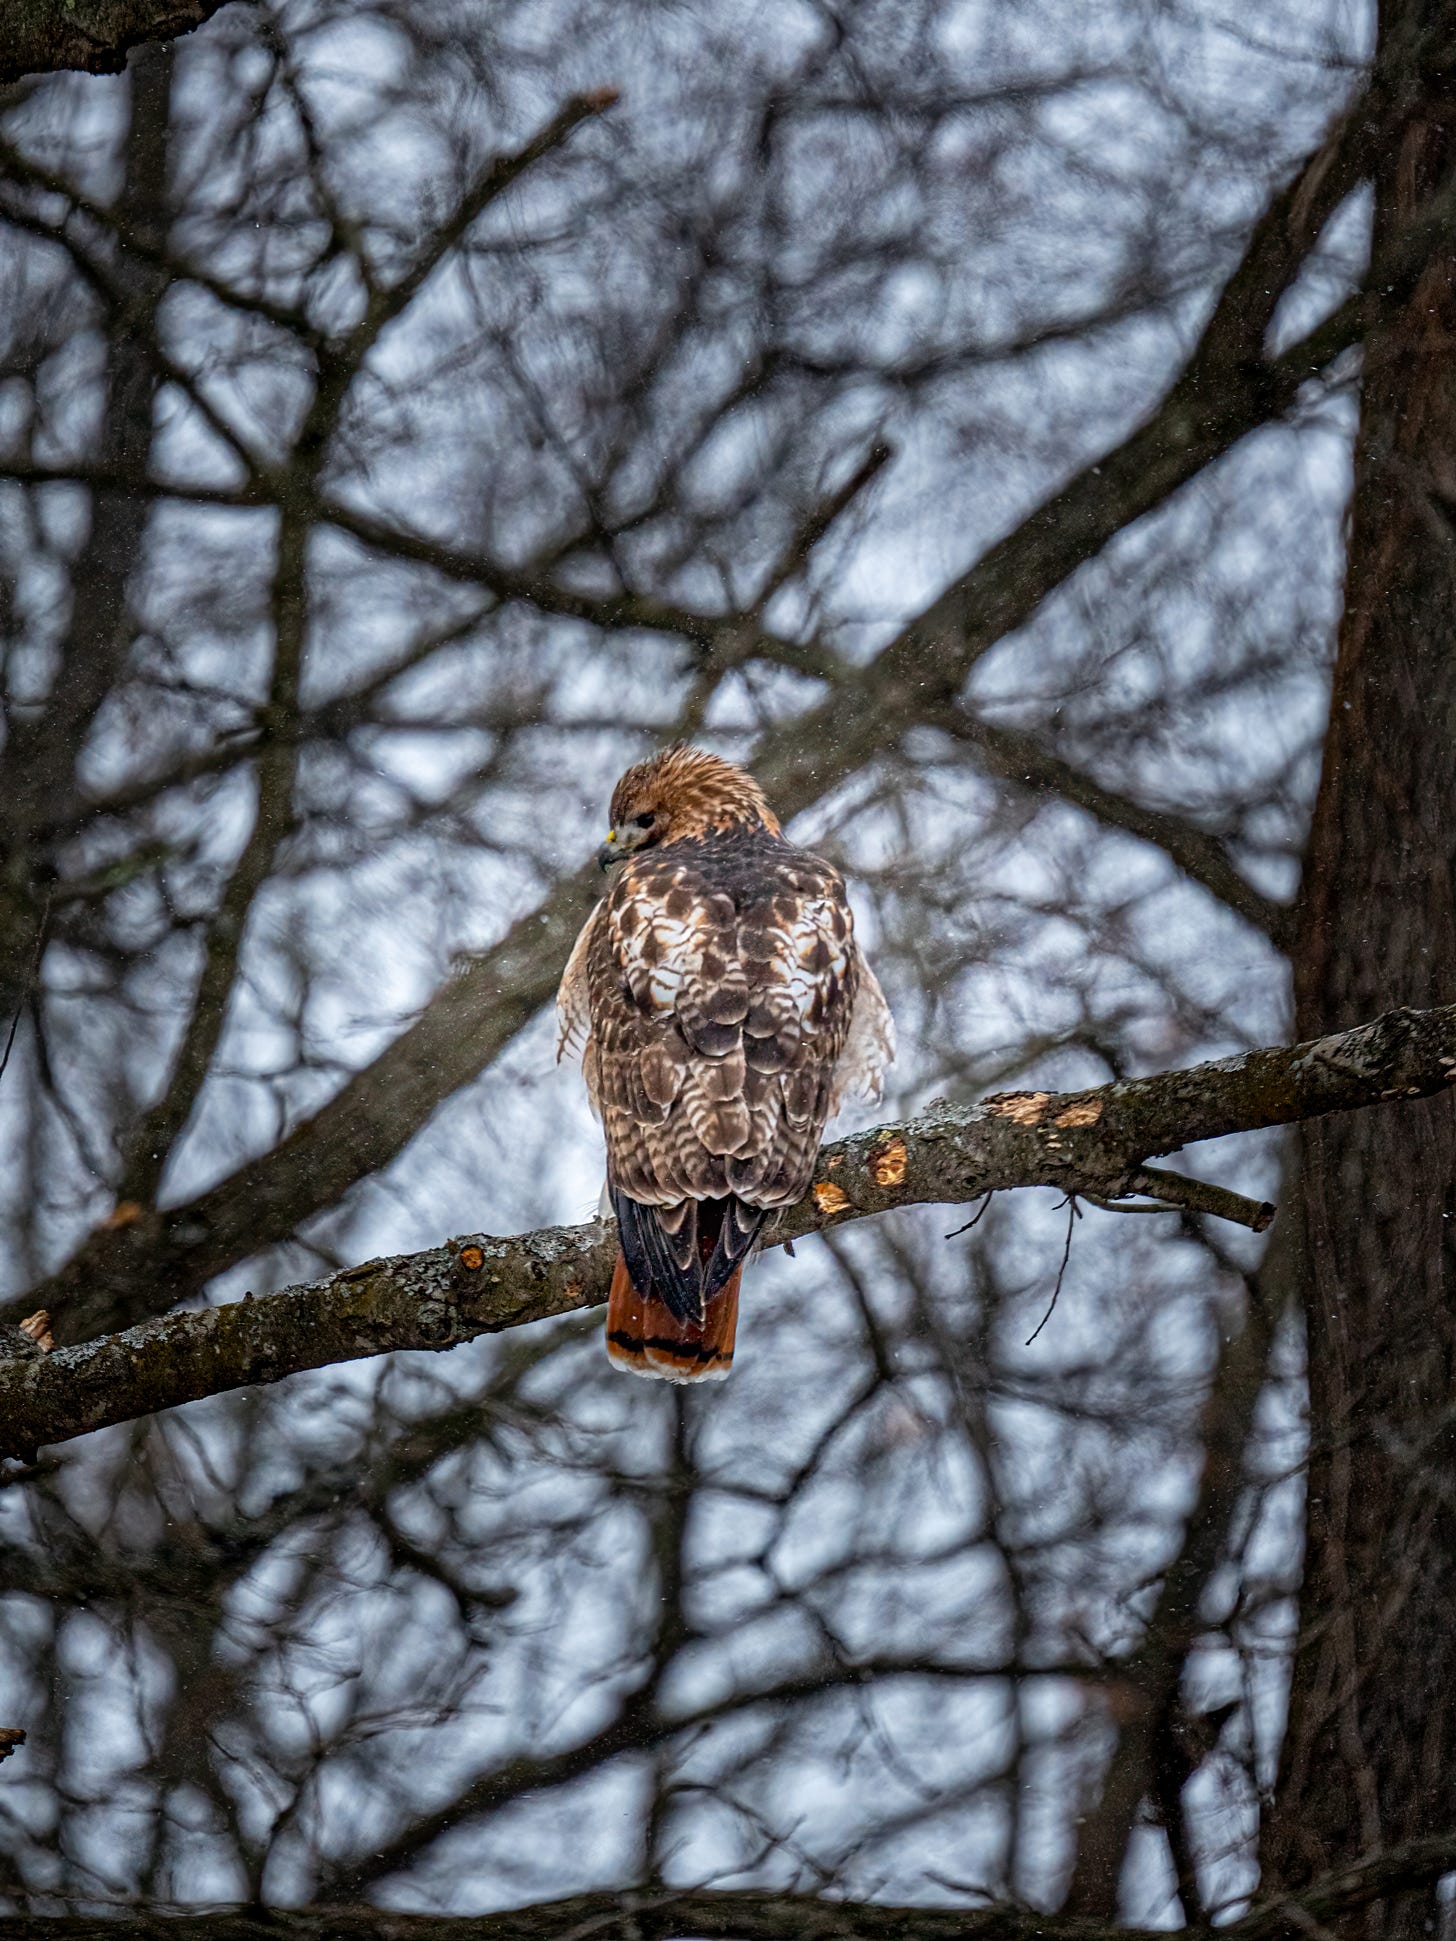 A red-tailed hawk perched in a thicket of trees to avoid the cold - 1/22/22, Hudson Mills Metropark - RH